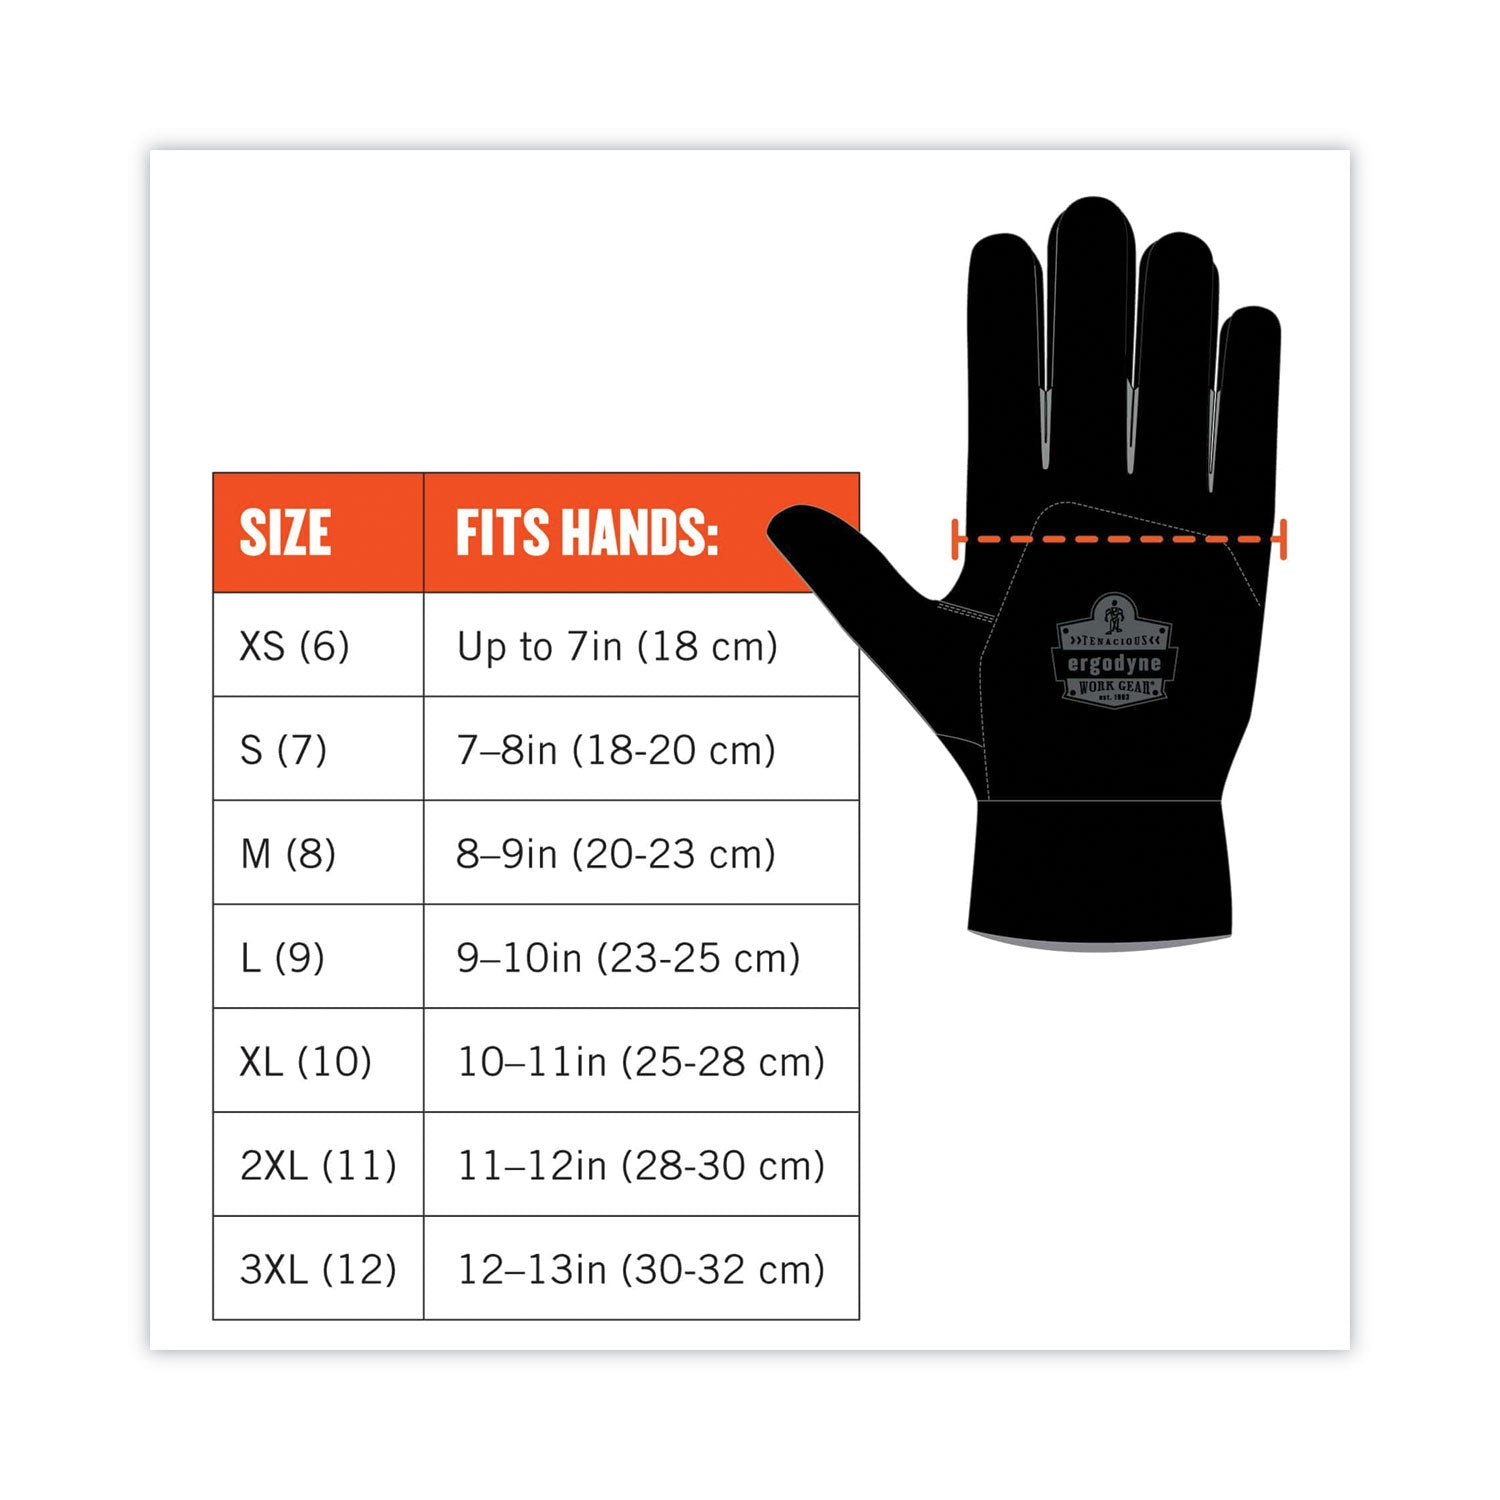 proflex-710-heavy-duty-mechanics-gloves-gray-2x-large-pair-ships-in-1-3-business-days_ego17046 - 6